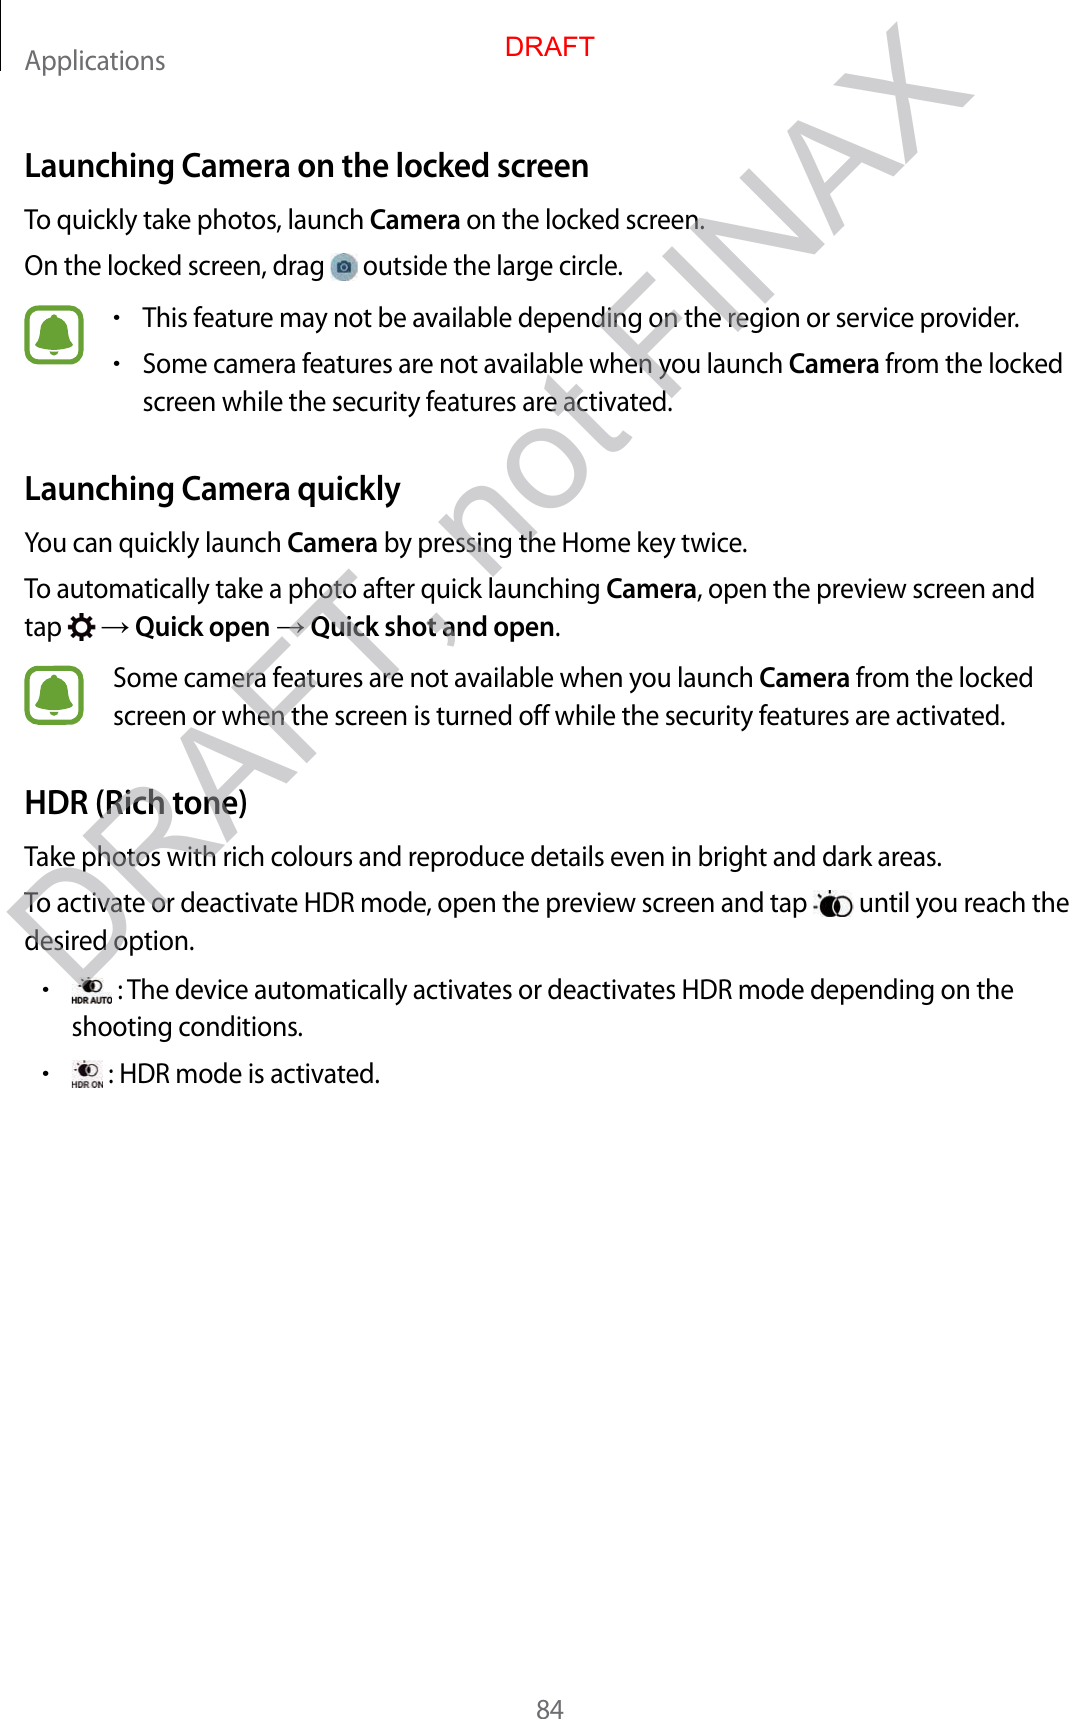 Applications84Launching Camera on the locked screenTo quickly take photos, launch Camera on the locked screen.On the locked screen, drag   outside the large circle.•This feature may not be available depending on the region or service provider.•Some camera features are not available when you launch Camera from the locked screen while the security features are activated.Launching Camera quicklyYou can quickly launch Camera by pressing the Home key twice.To automatically take a photo after quick launching Camera, open the preview screen and tap    Quick open  Quick shot and open.Some camera features are not available when you launch Camera from the locked screen or when the screen is turned off while the security features are activated.HDR (Rich tone)Take photos with rich colours and reproduce details even in bright and dark areas.To activate or deactivate HDR mode, open the preview screen and tap   until you reach the desired option.• : The device automatically activates or deactivates HDR mode depending on the shooting conditions.• : HDR mode is activated.DRAFTDRAFT, not FINAX